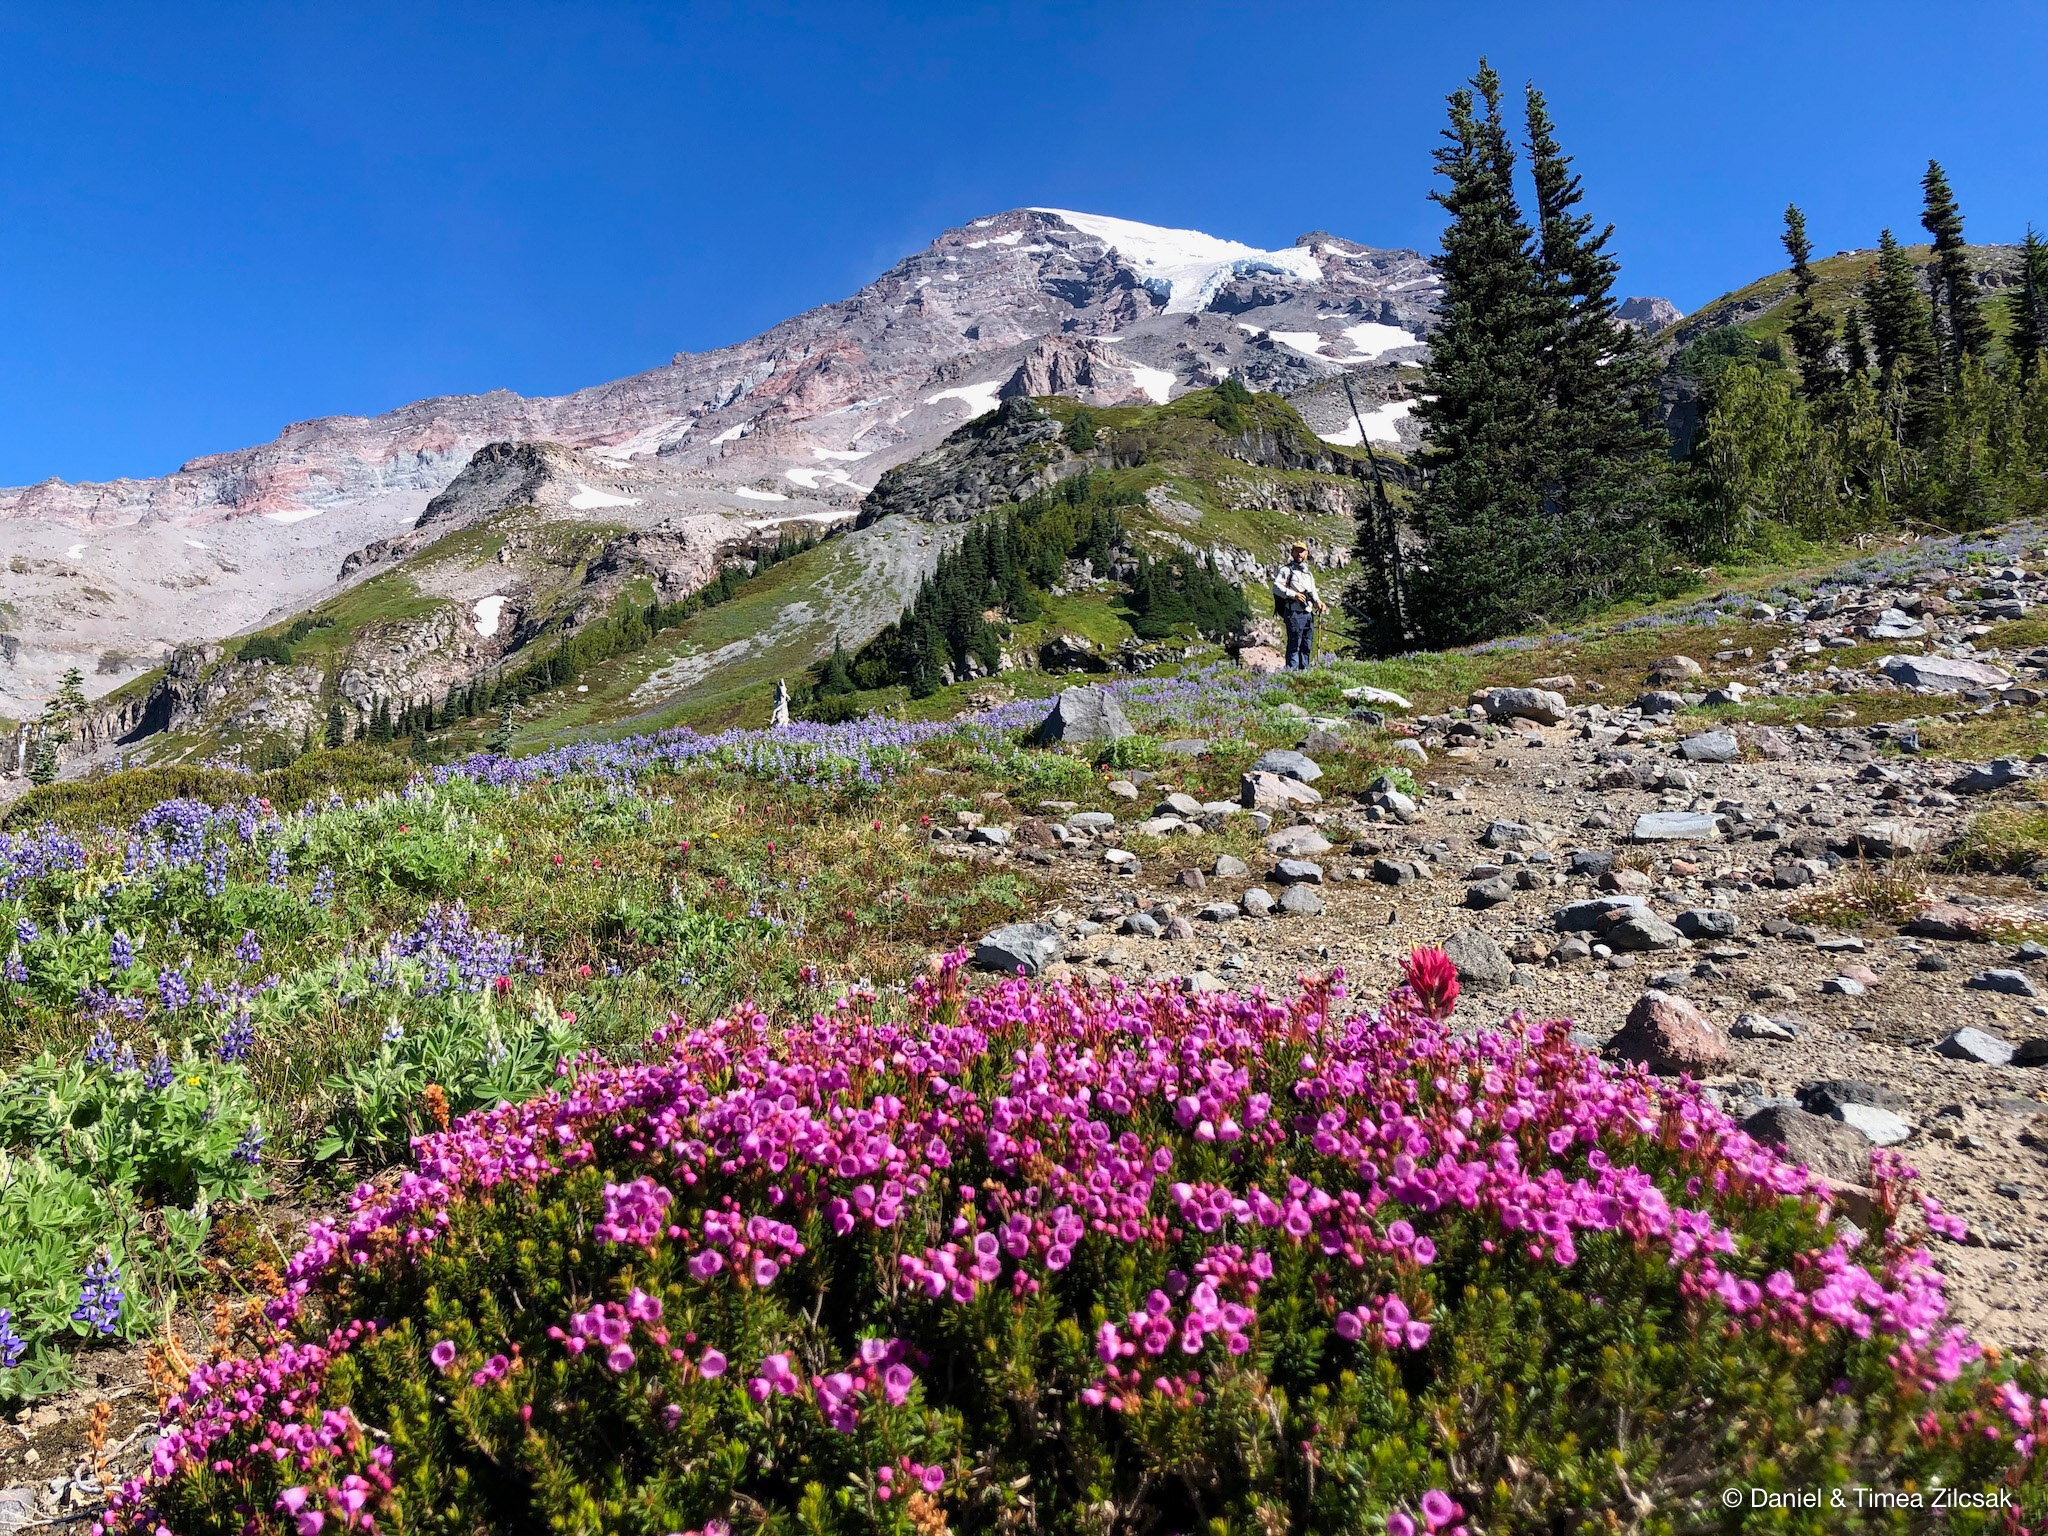 View of Kautz Glacier of Mount Rainier from Van Trump Park  with pink heather in the foreground